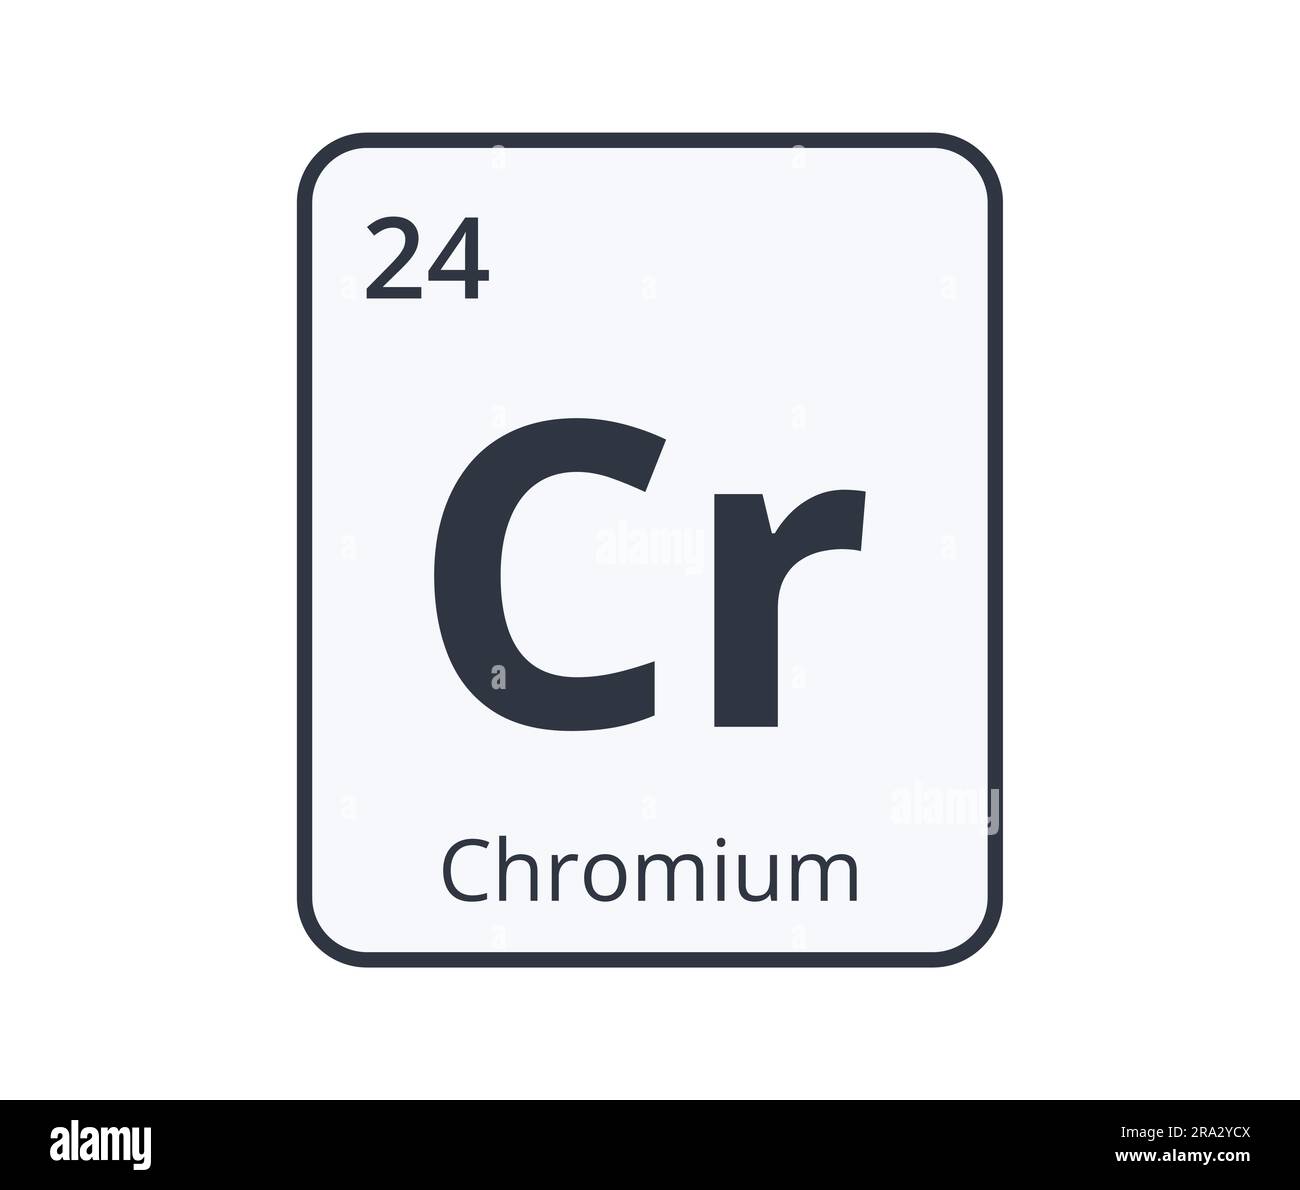 Chromium Chemical Element Graphic for Science Designs. Stock Vector